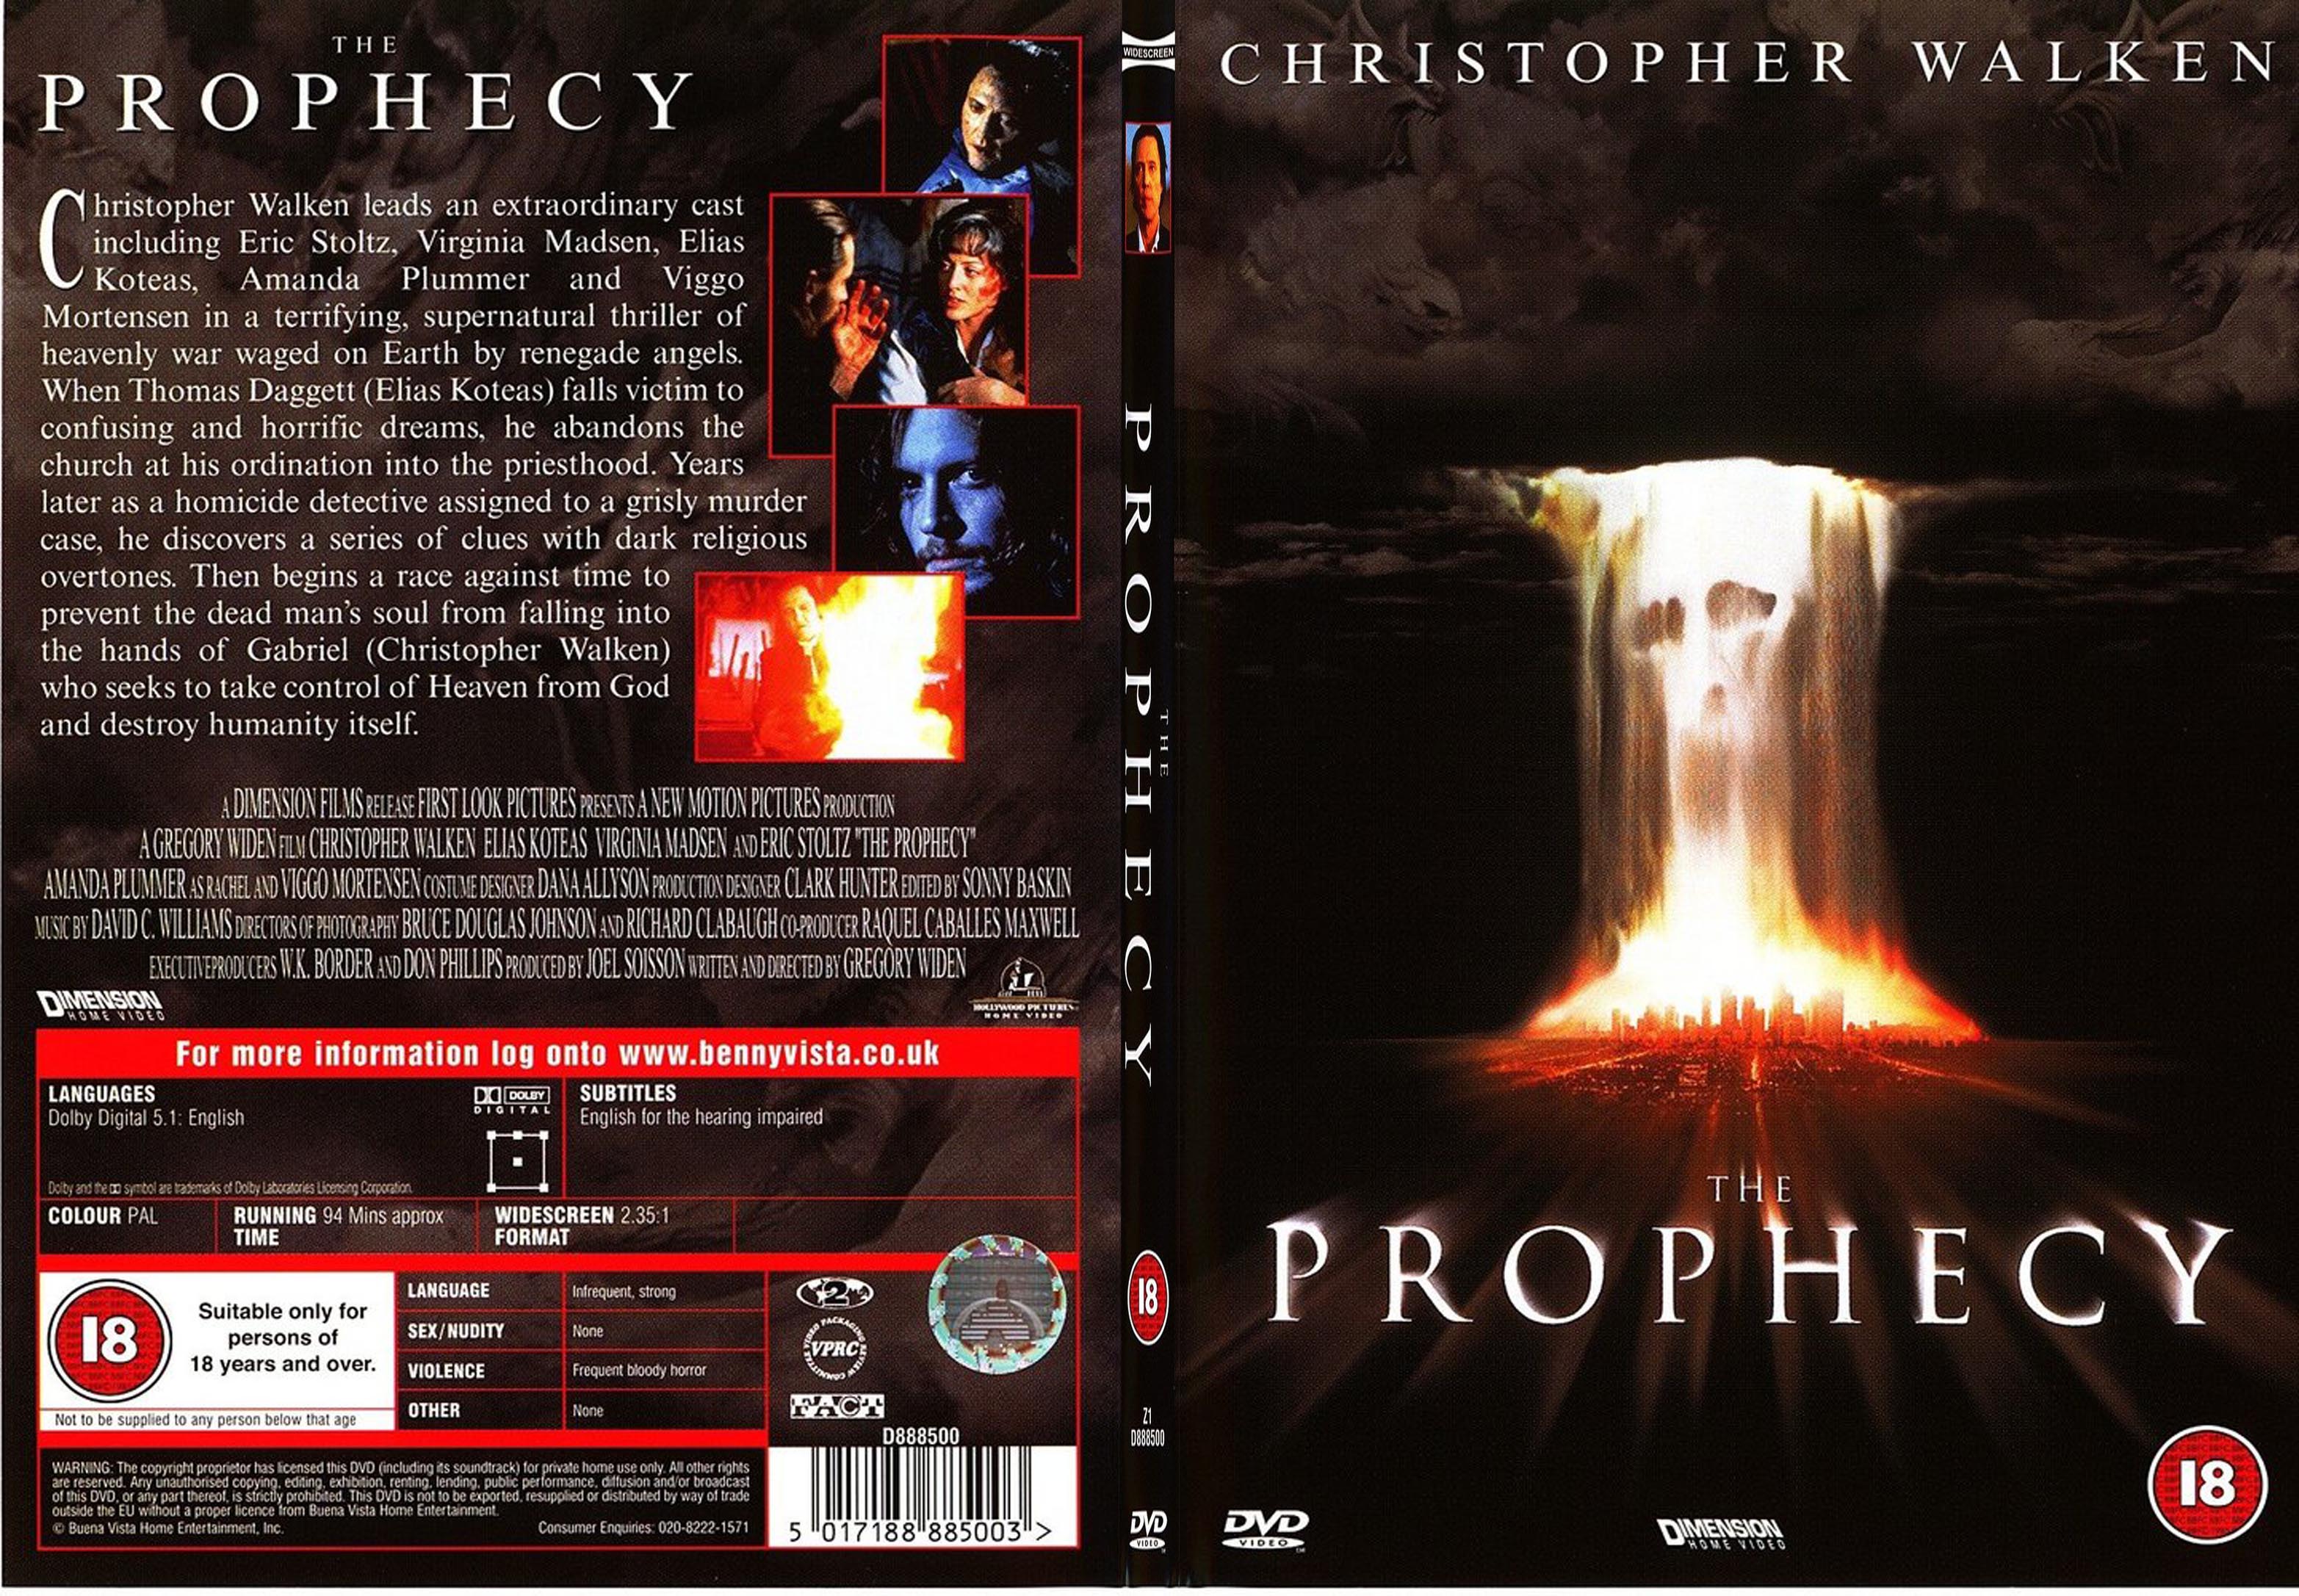 Jaquette DVD The prophecy - SLIM